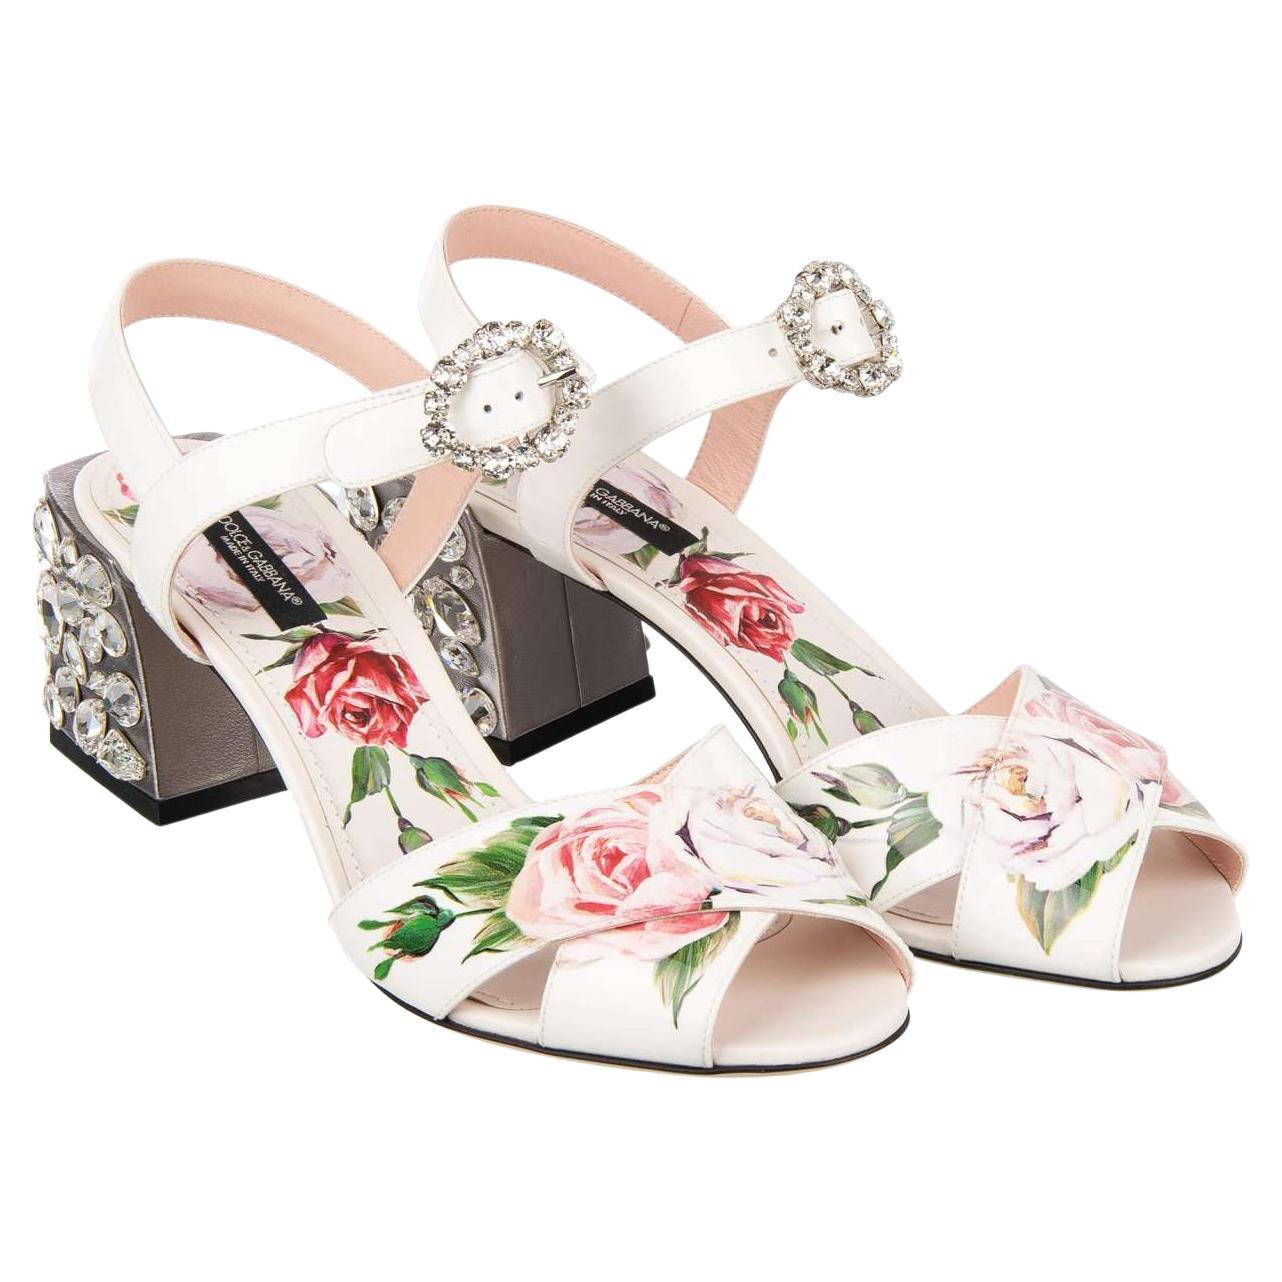 D&G Patent Leather Rose Pumps Sandals KEIRA with Crystal Heel White Silver 36 For Sale